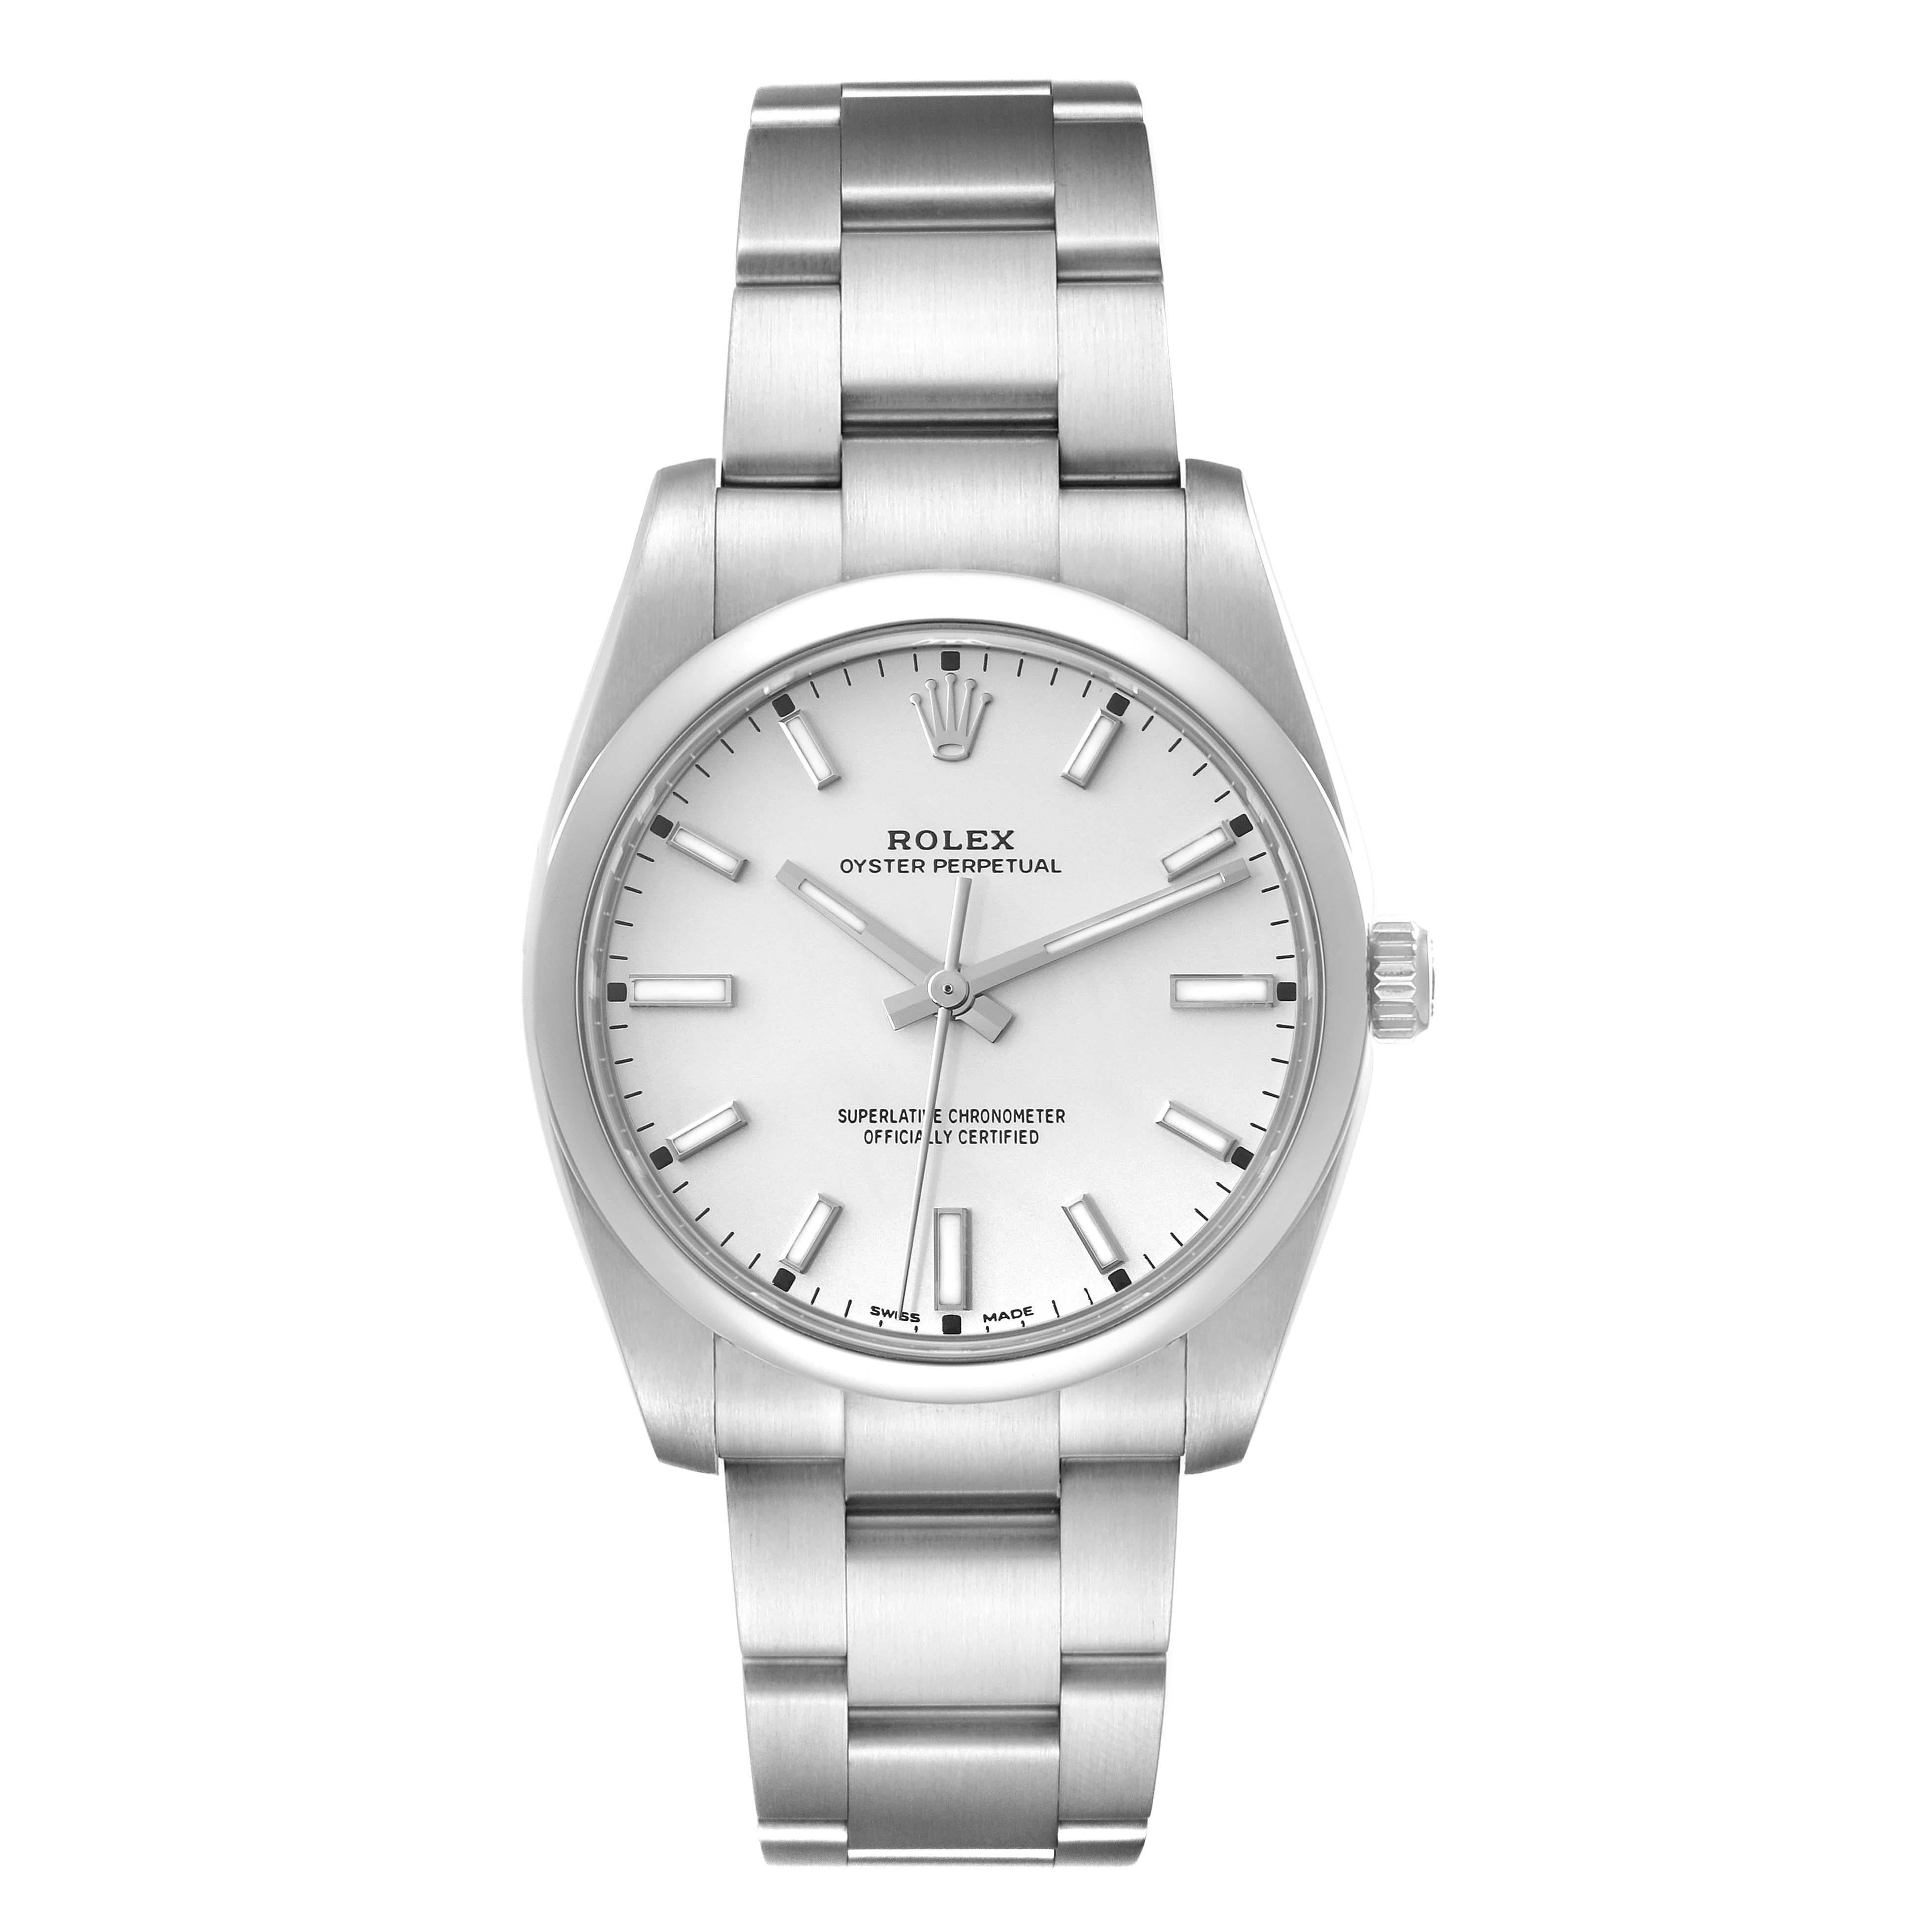 Rolex Oyster Perpetual Silver Dial Smooth Bezel Steel Mens Watch 114200 Box Card. Officially certified chronometer self-winding movement. Stainless steel case 34 mm in diameter. Rolex logo on a crown. Stainless steel smooth domed bezel. Scratch